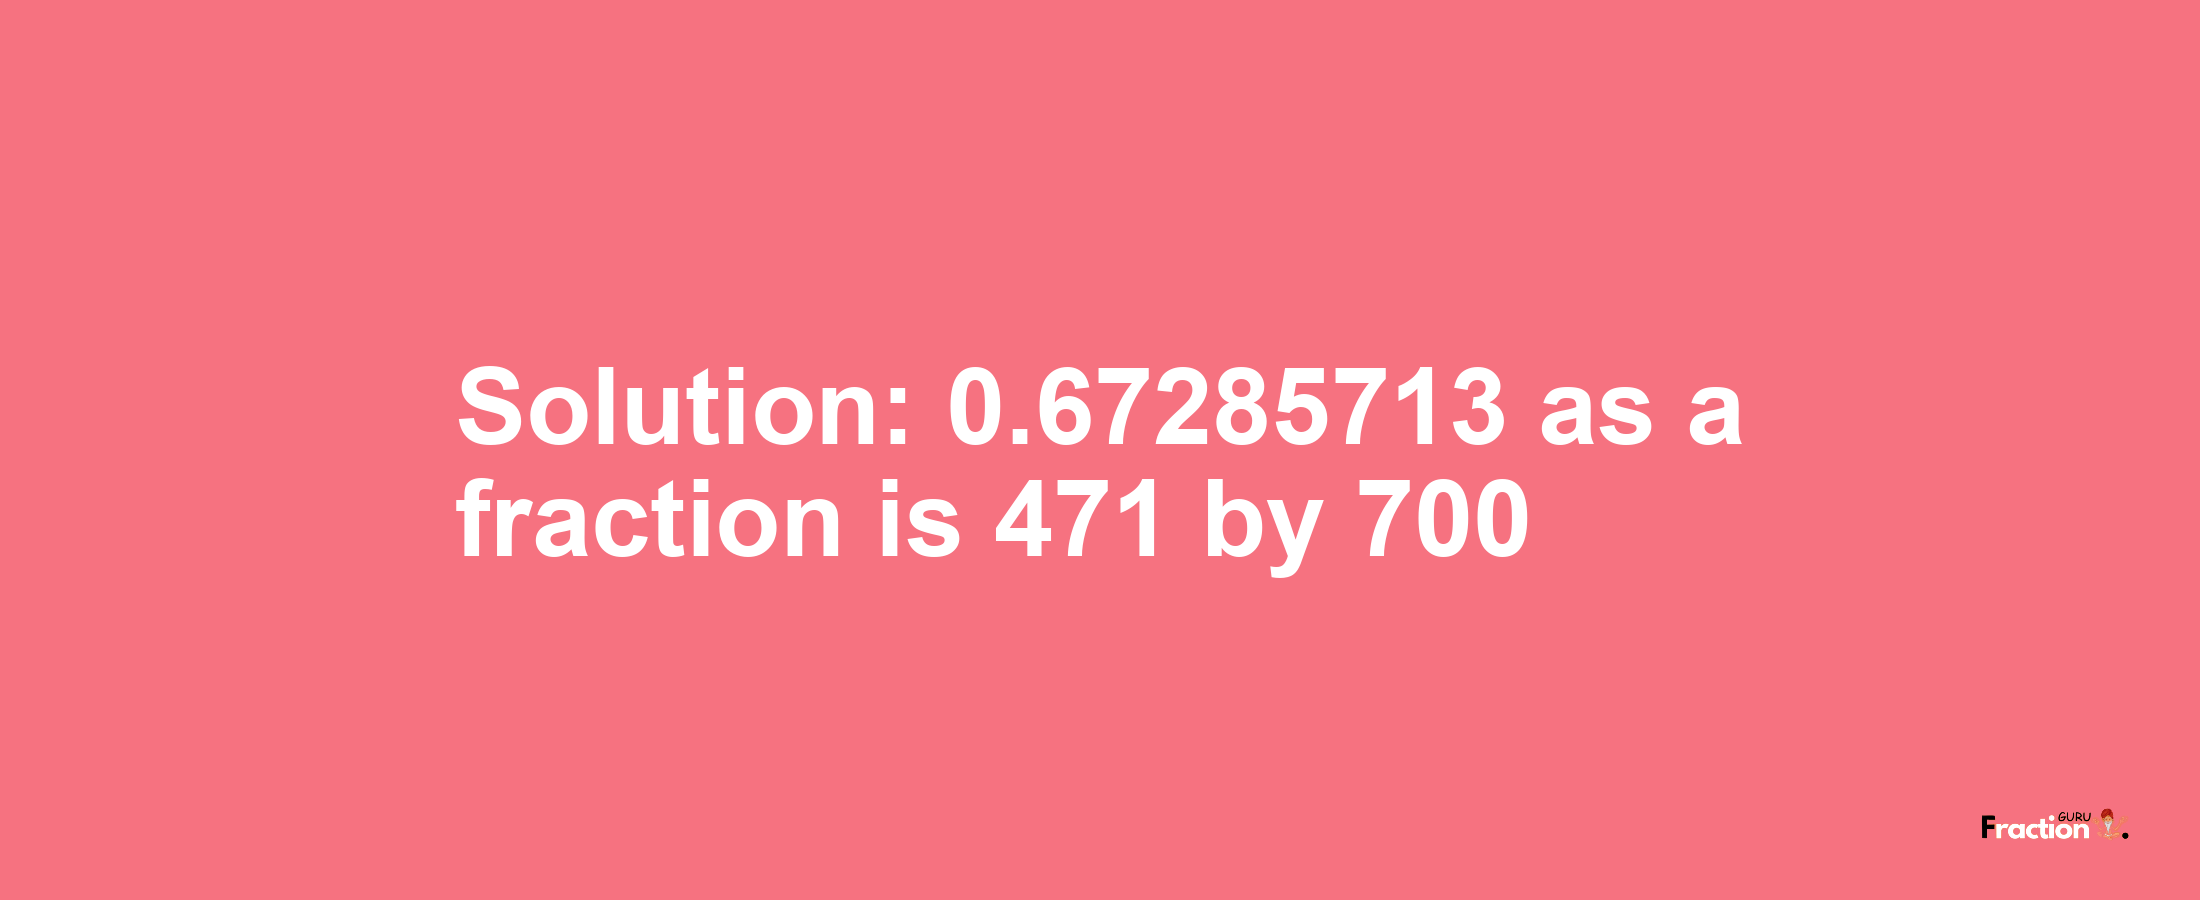 Solution:0.67285713 as a fraction is 471/700